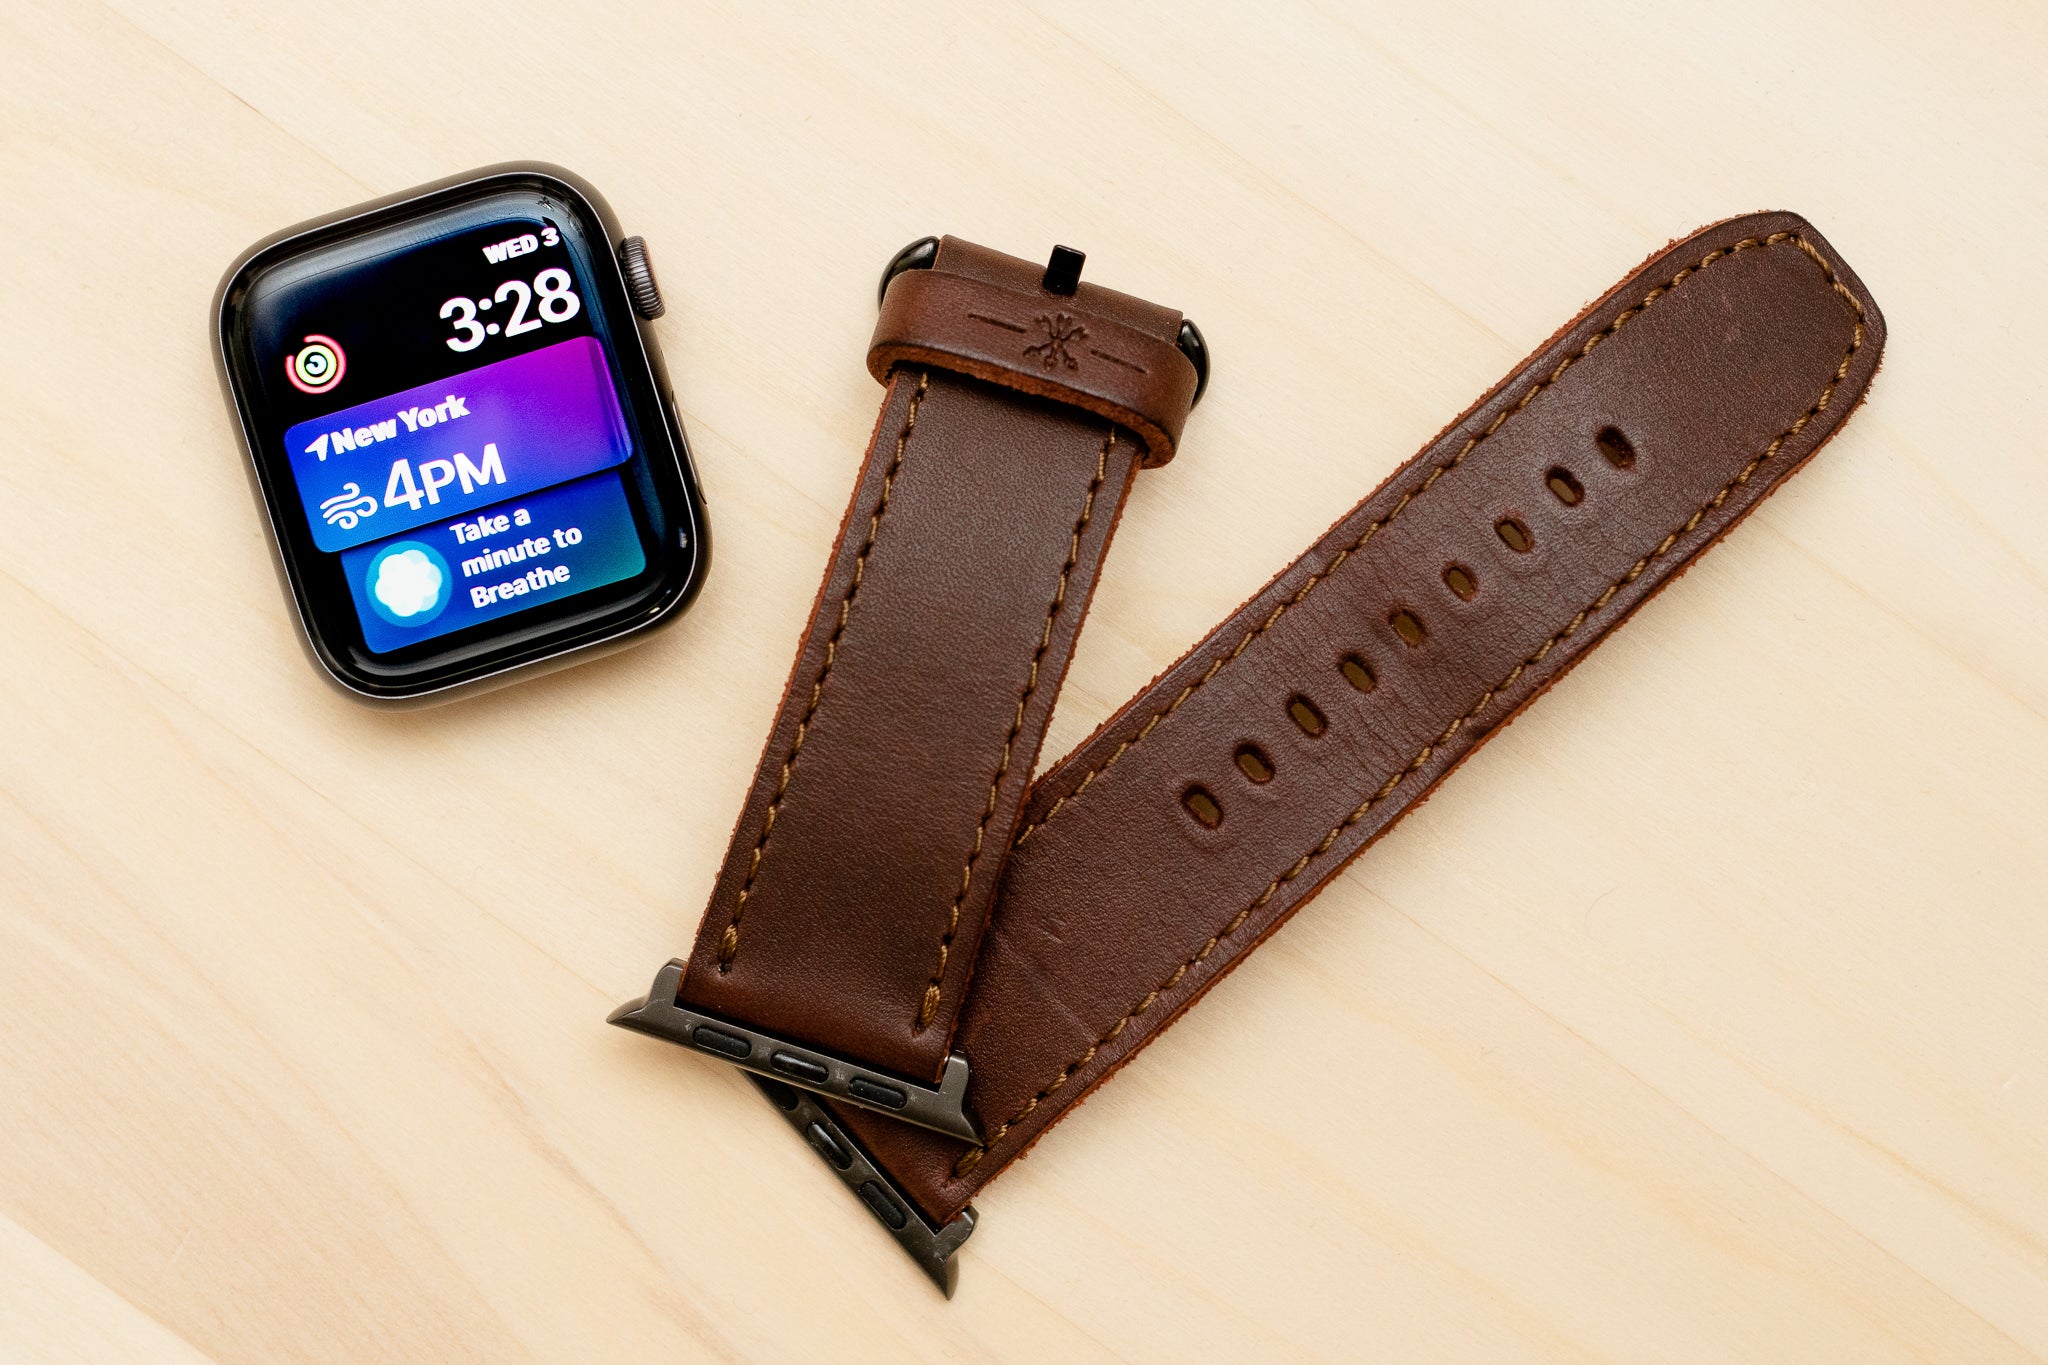 Apple plans to eliminate leather bands for smartwatches